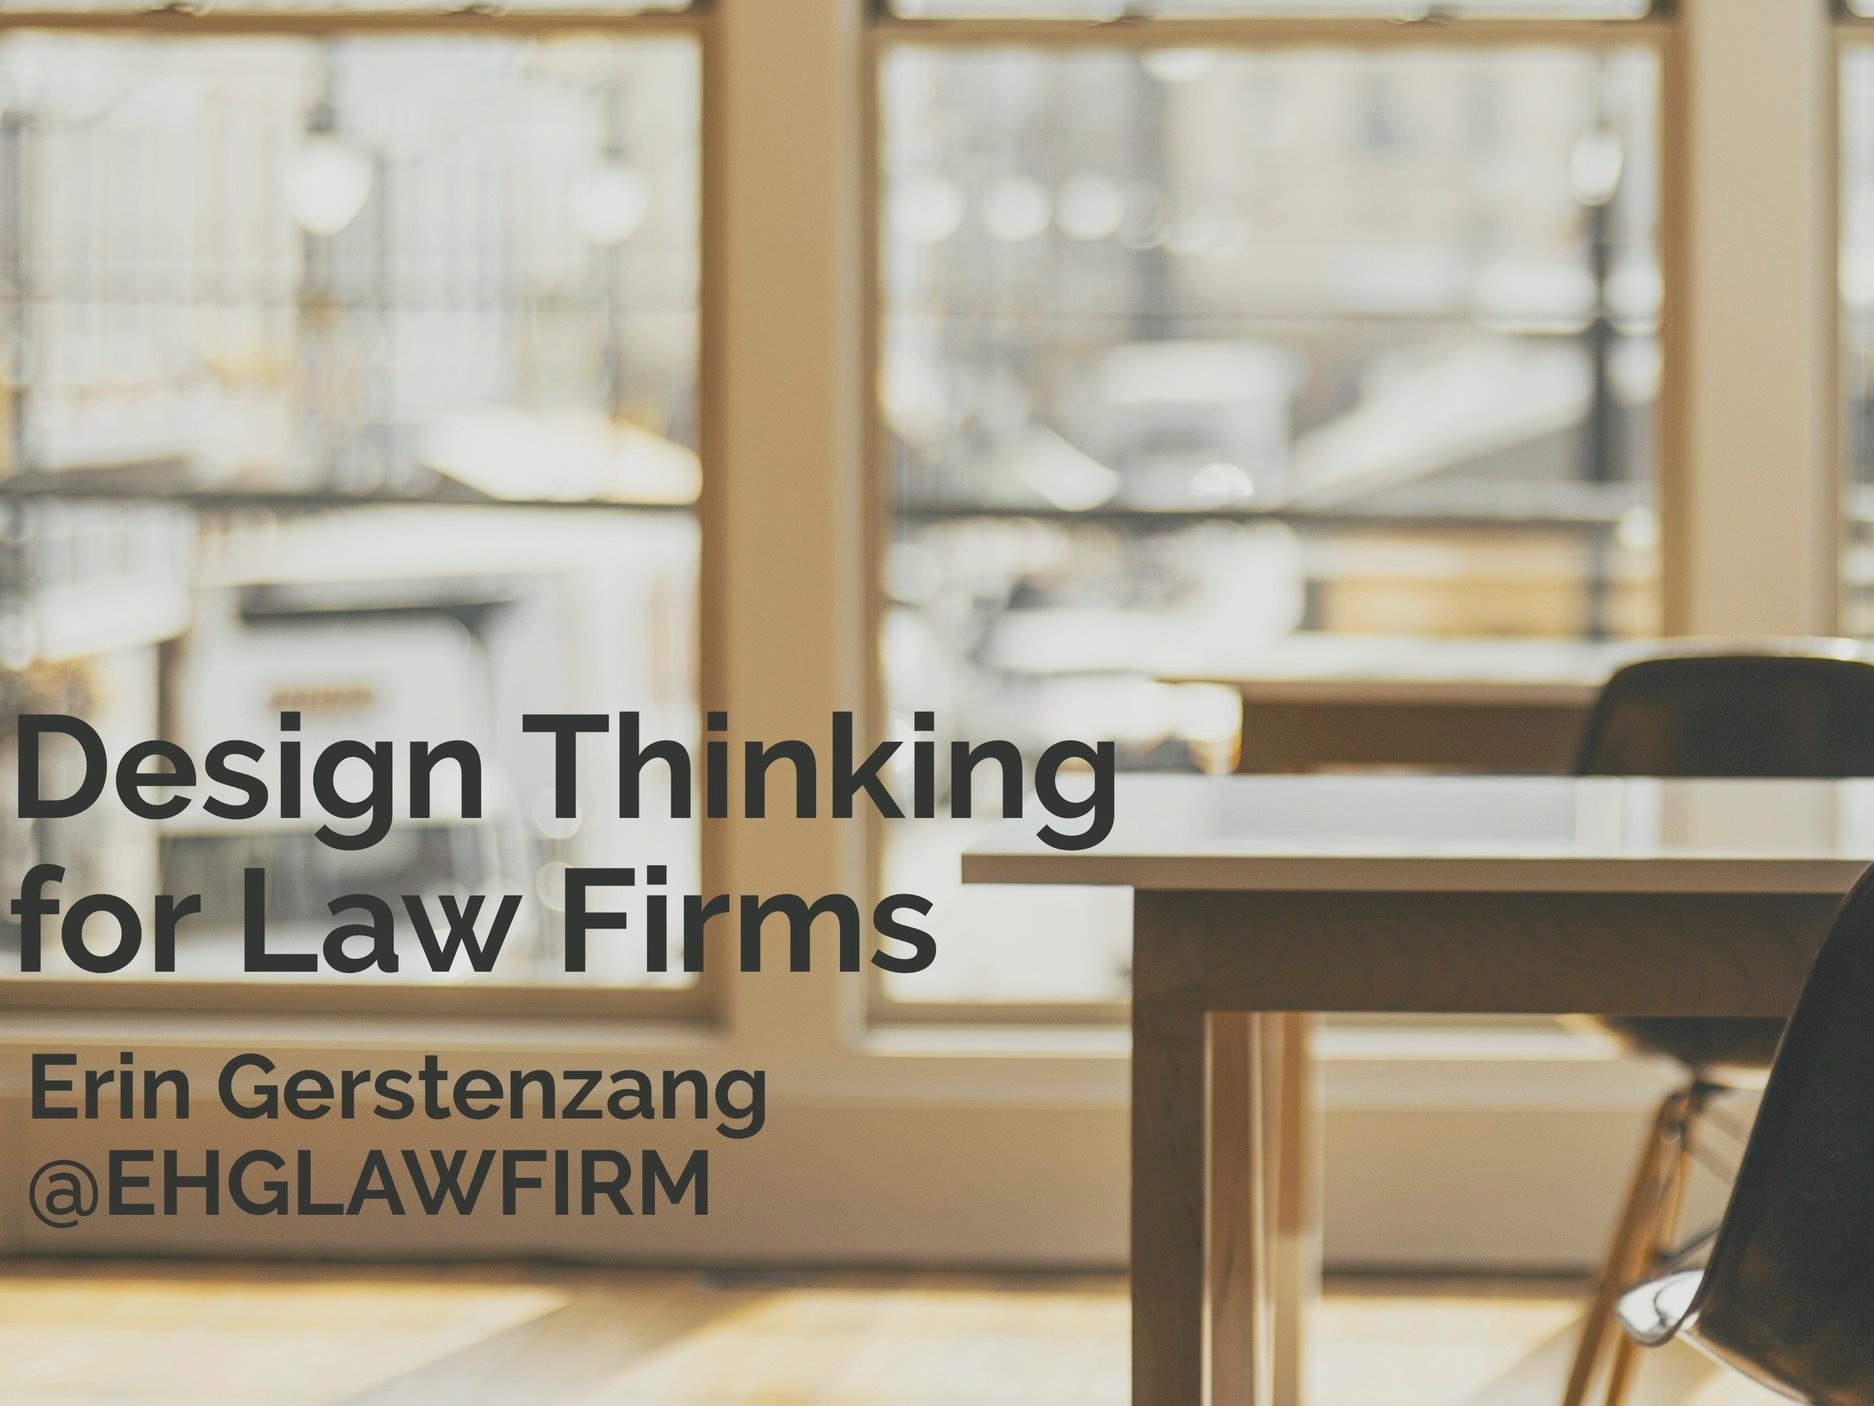 design thinking for law firms title.jpg